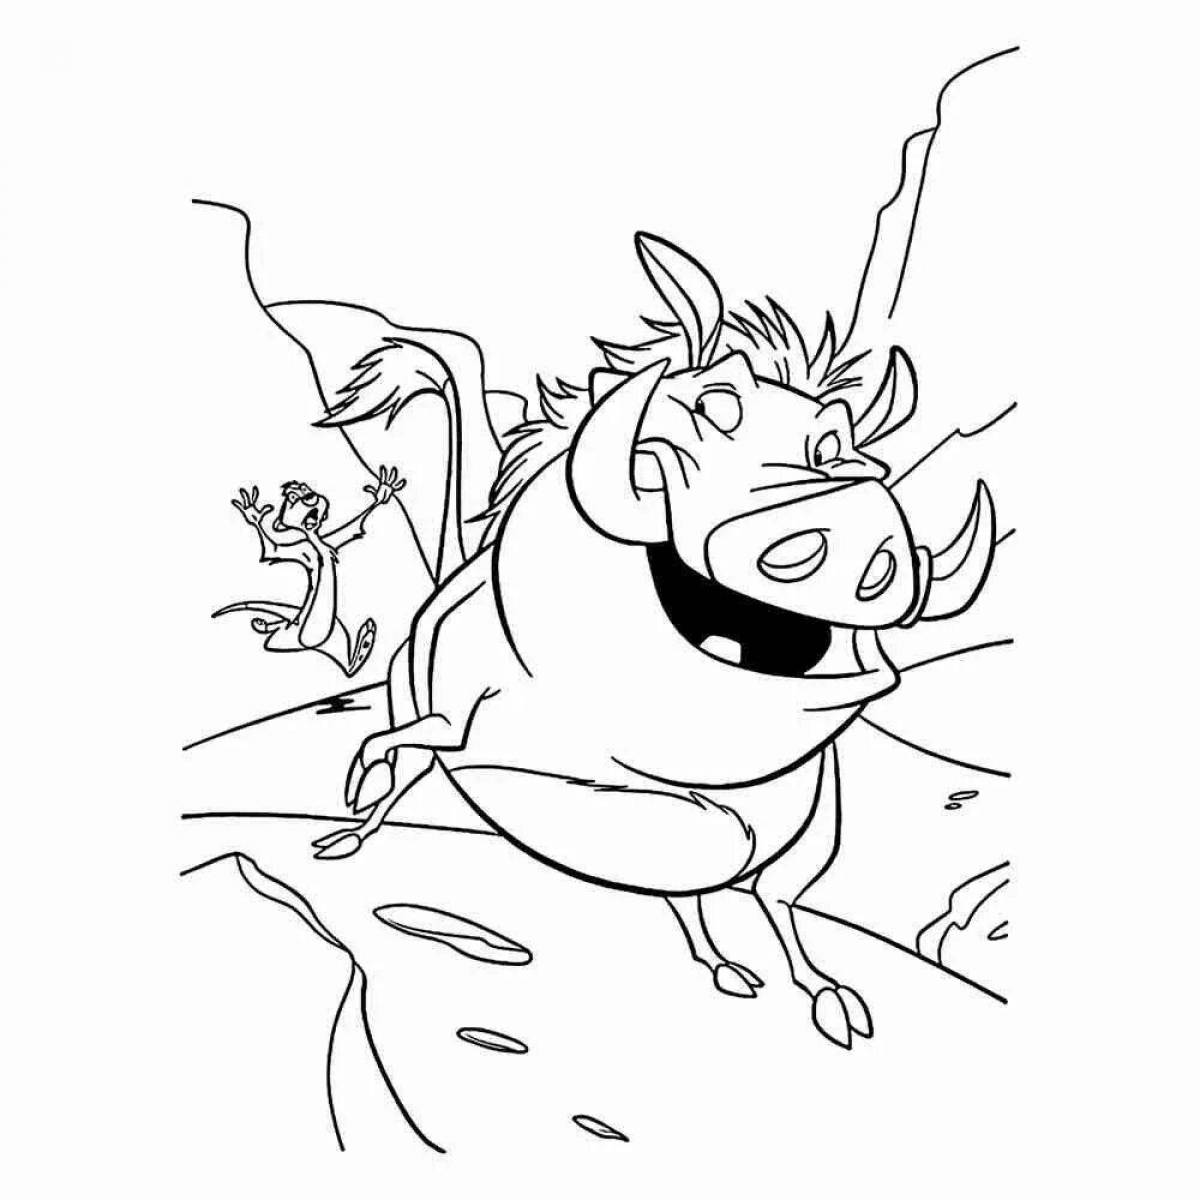 Attractive pumba coloring page